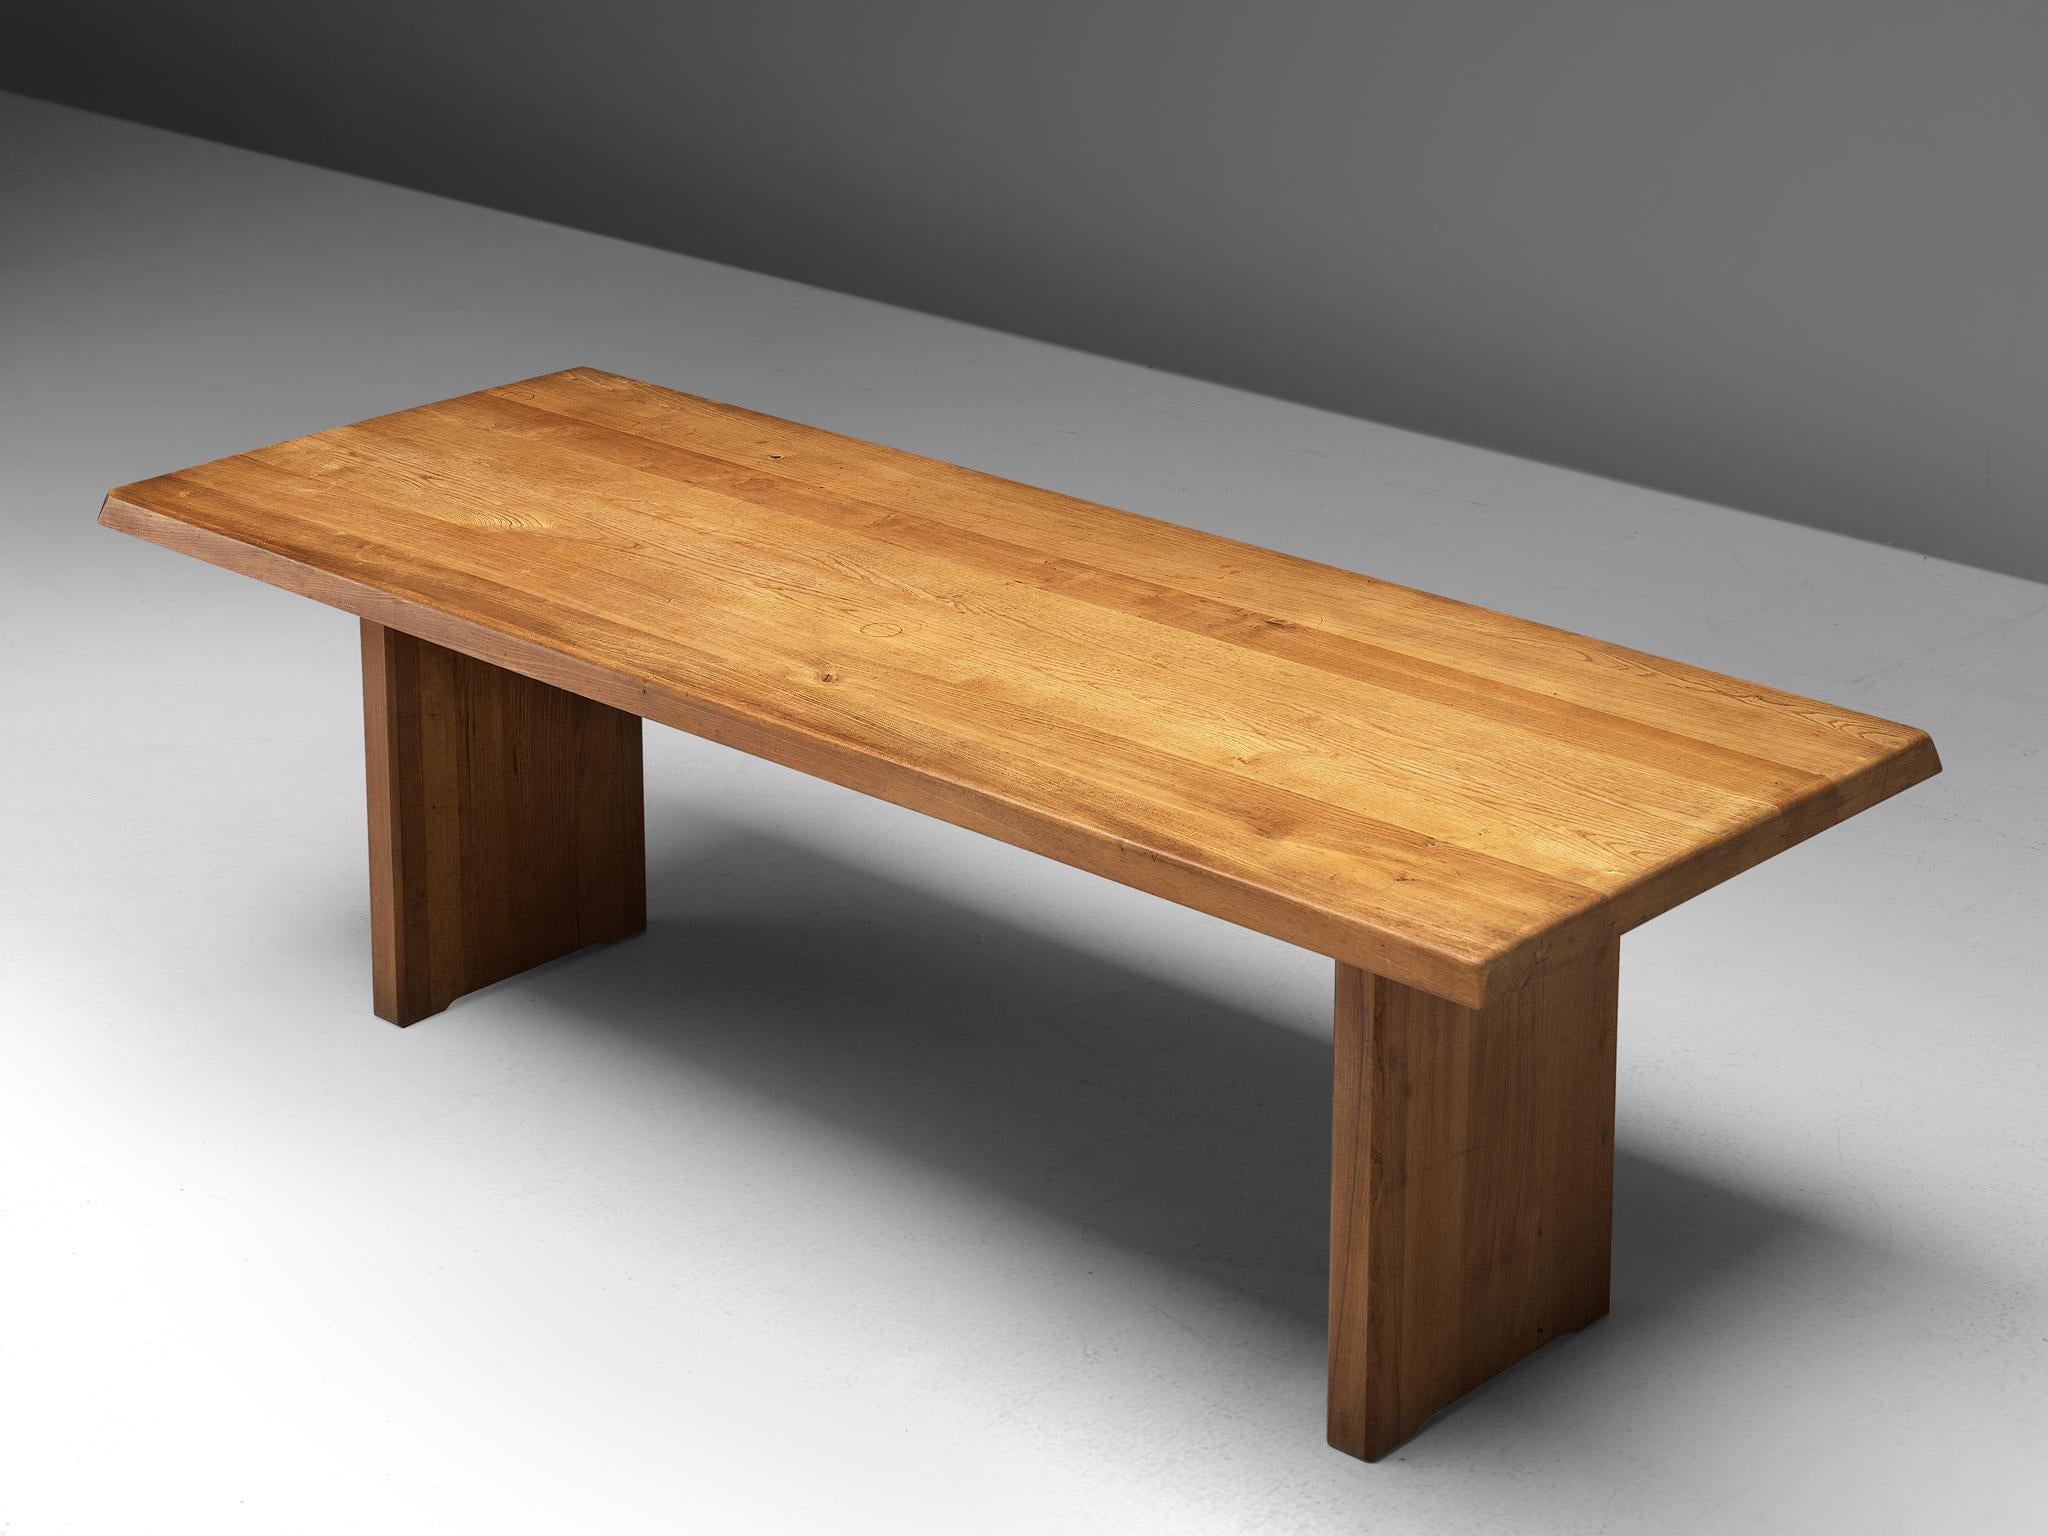 Pierre Chapo, dining table model T14C, elm, France, design 1960s, later production.

This dining table is designed by the French designer Pierre Chapo. Strong and simplified design which clearly emerges the woods grain and natural look. The